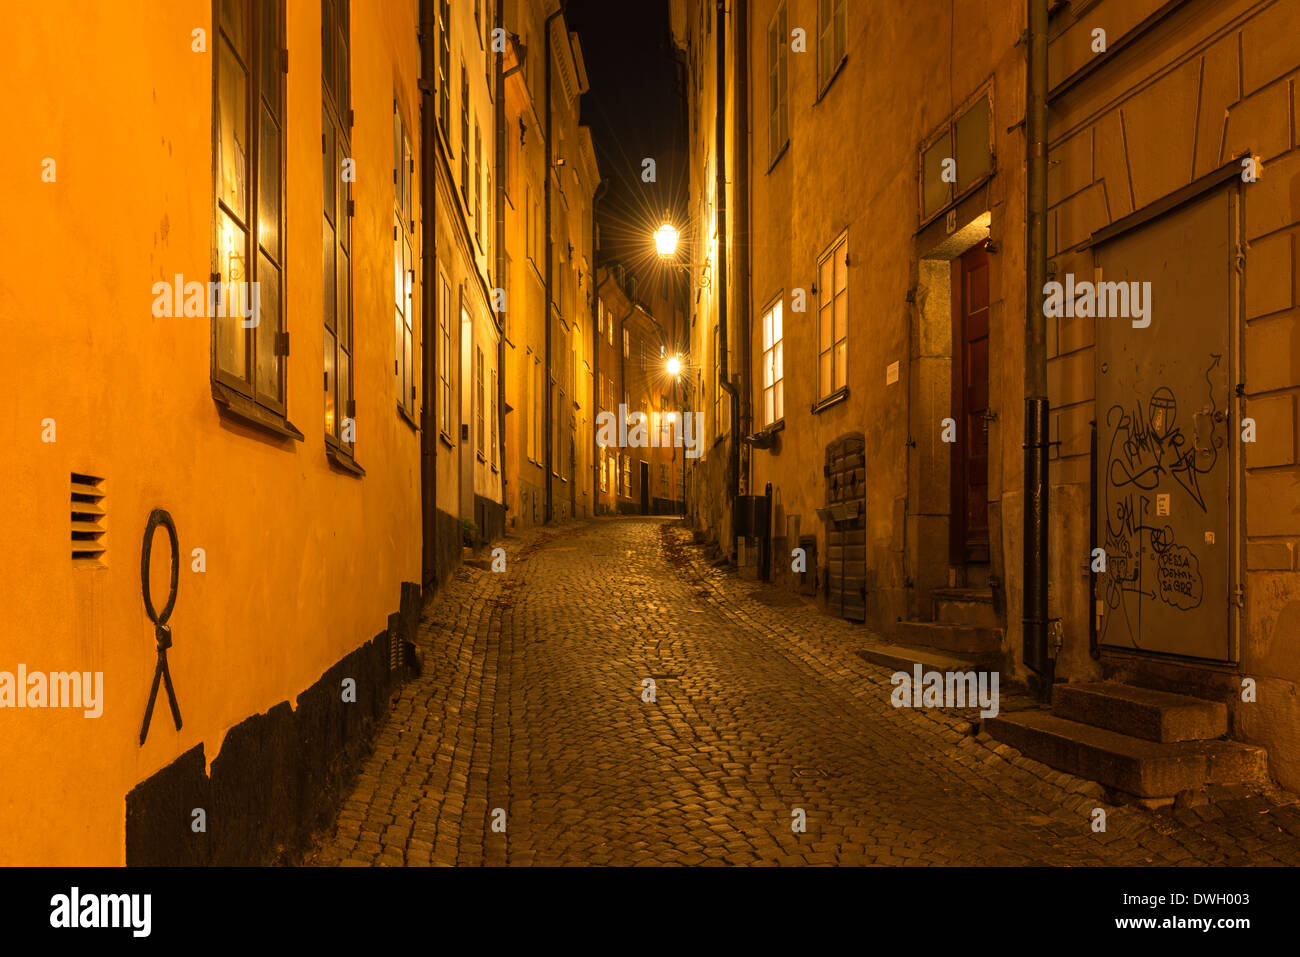 Evening view of Baggensgatan, a narrow cobbled lane in Gamla Stan, the old town of Stockholm, Sweden. Stock Photo